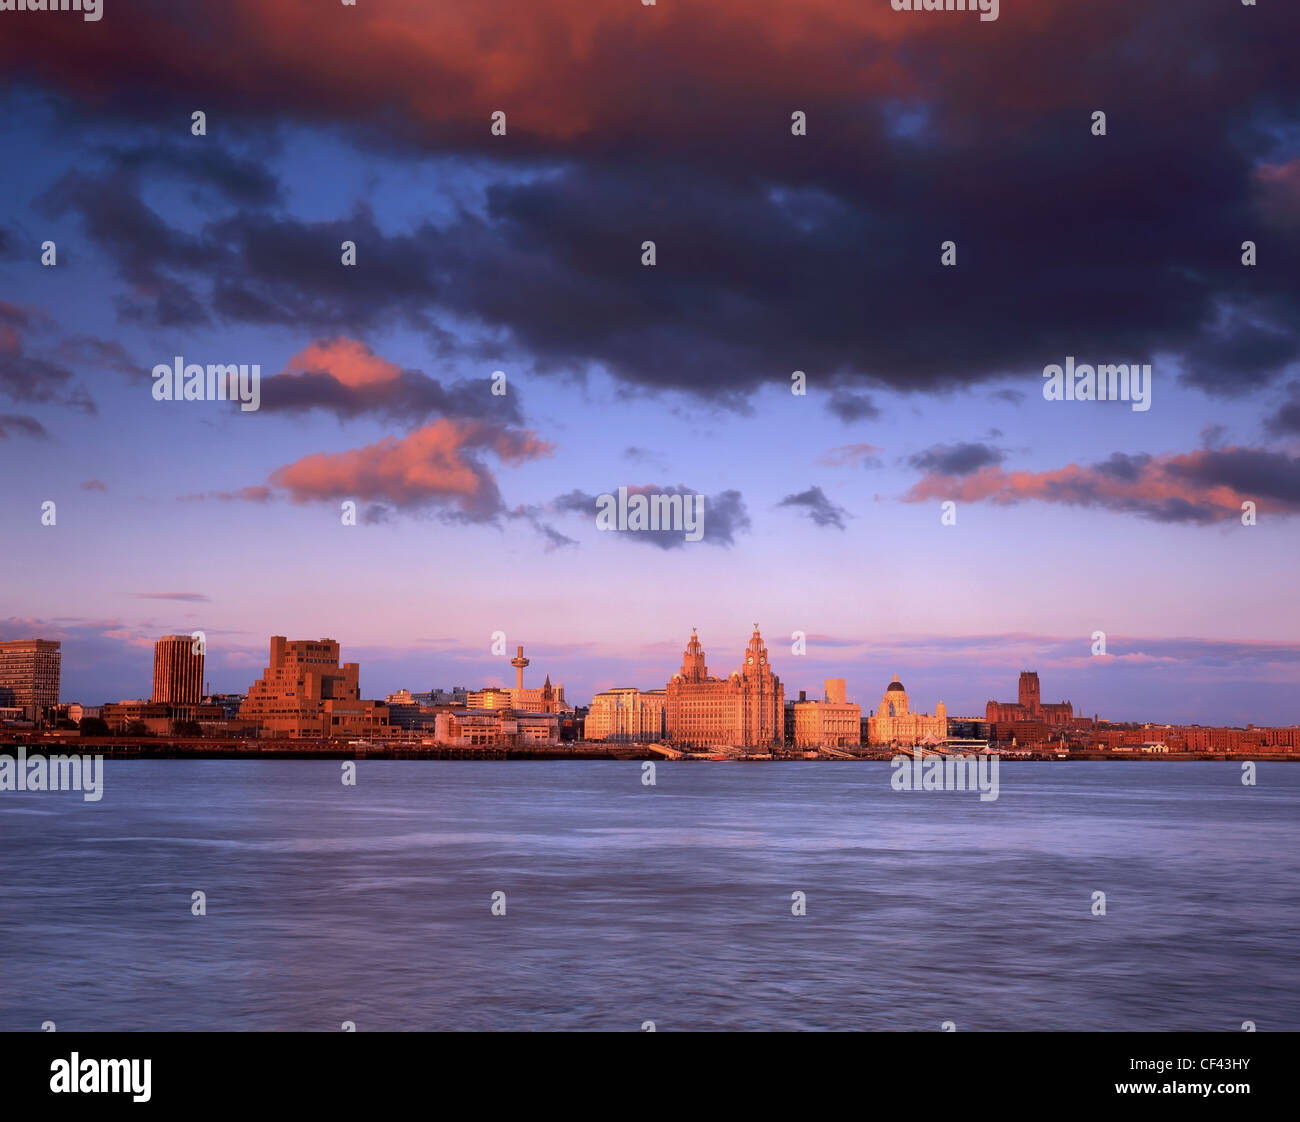 View across the River Mersey towards the Three Graces on the Liverpool waterfront at sunset. Stock Photo